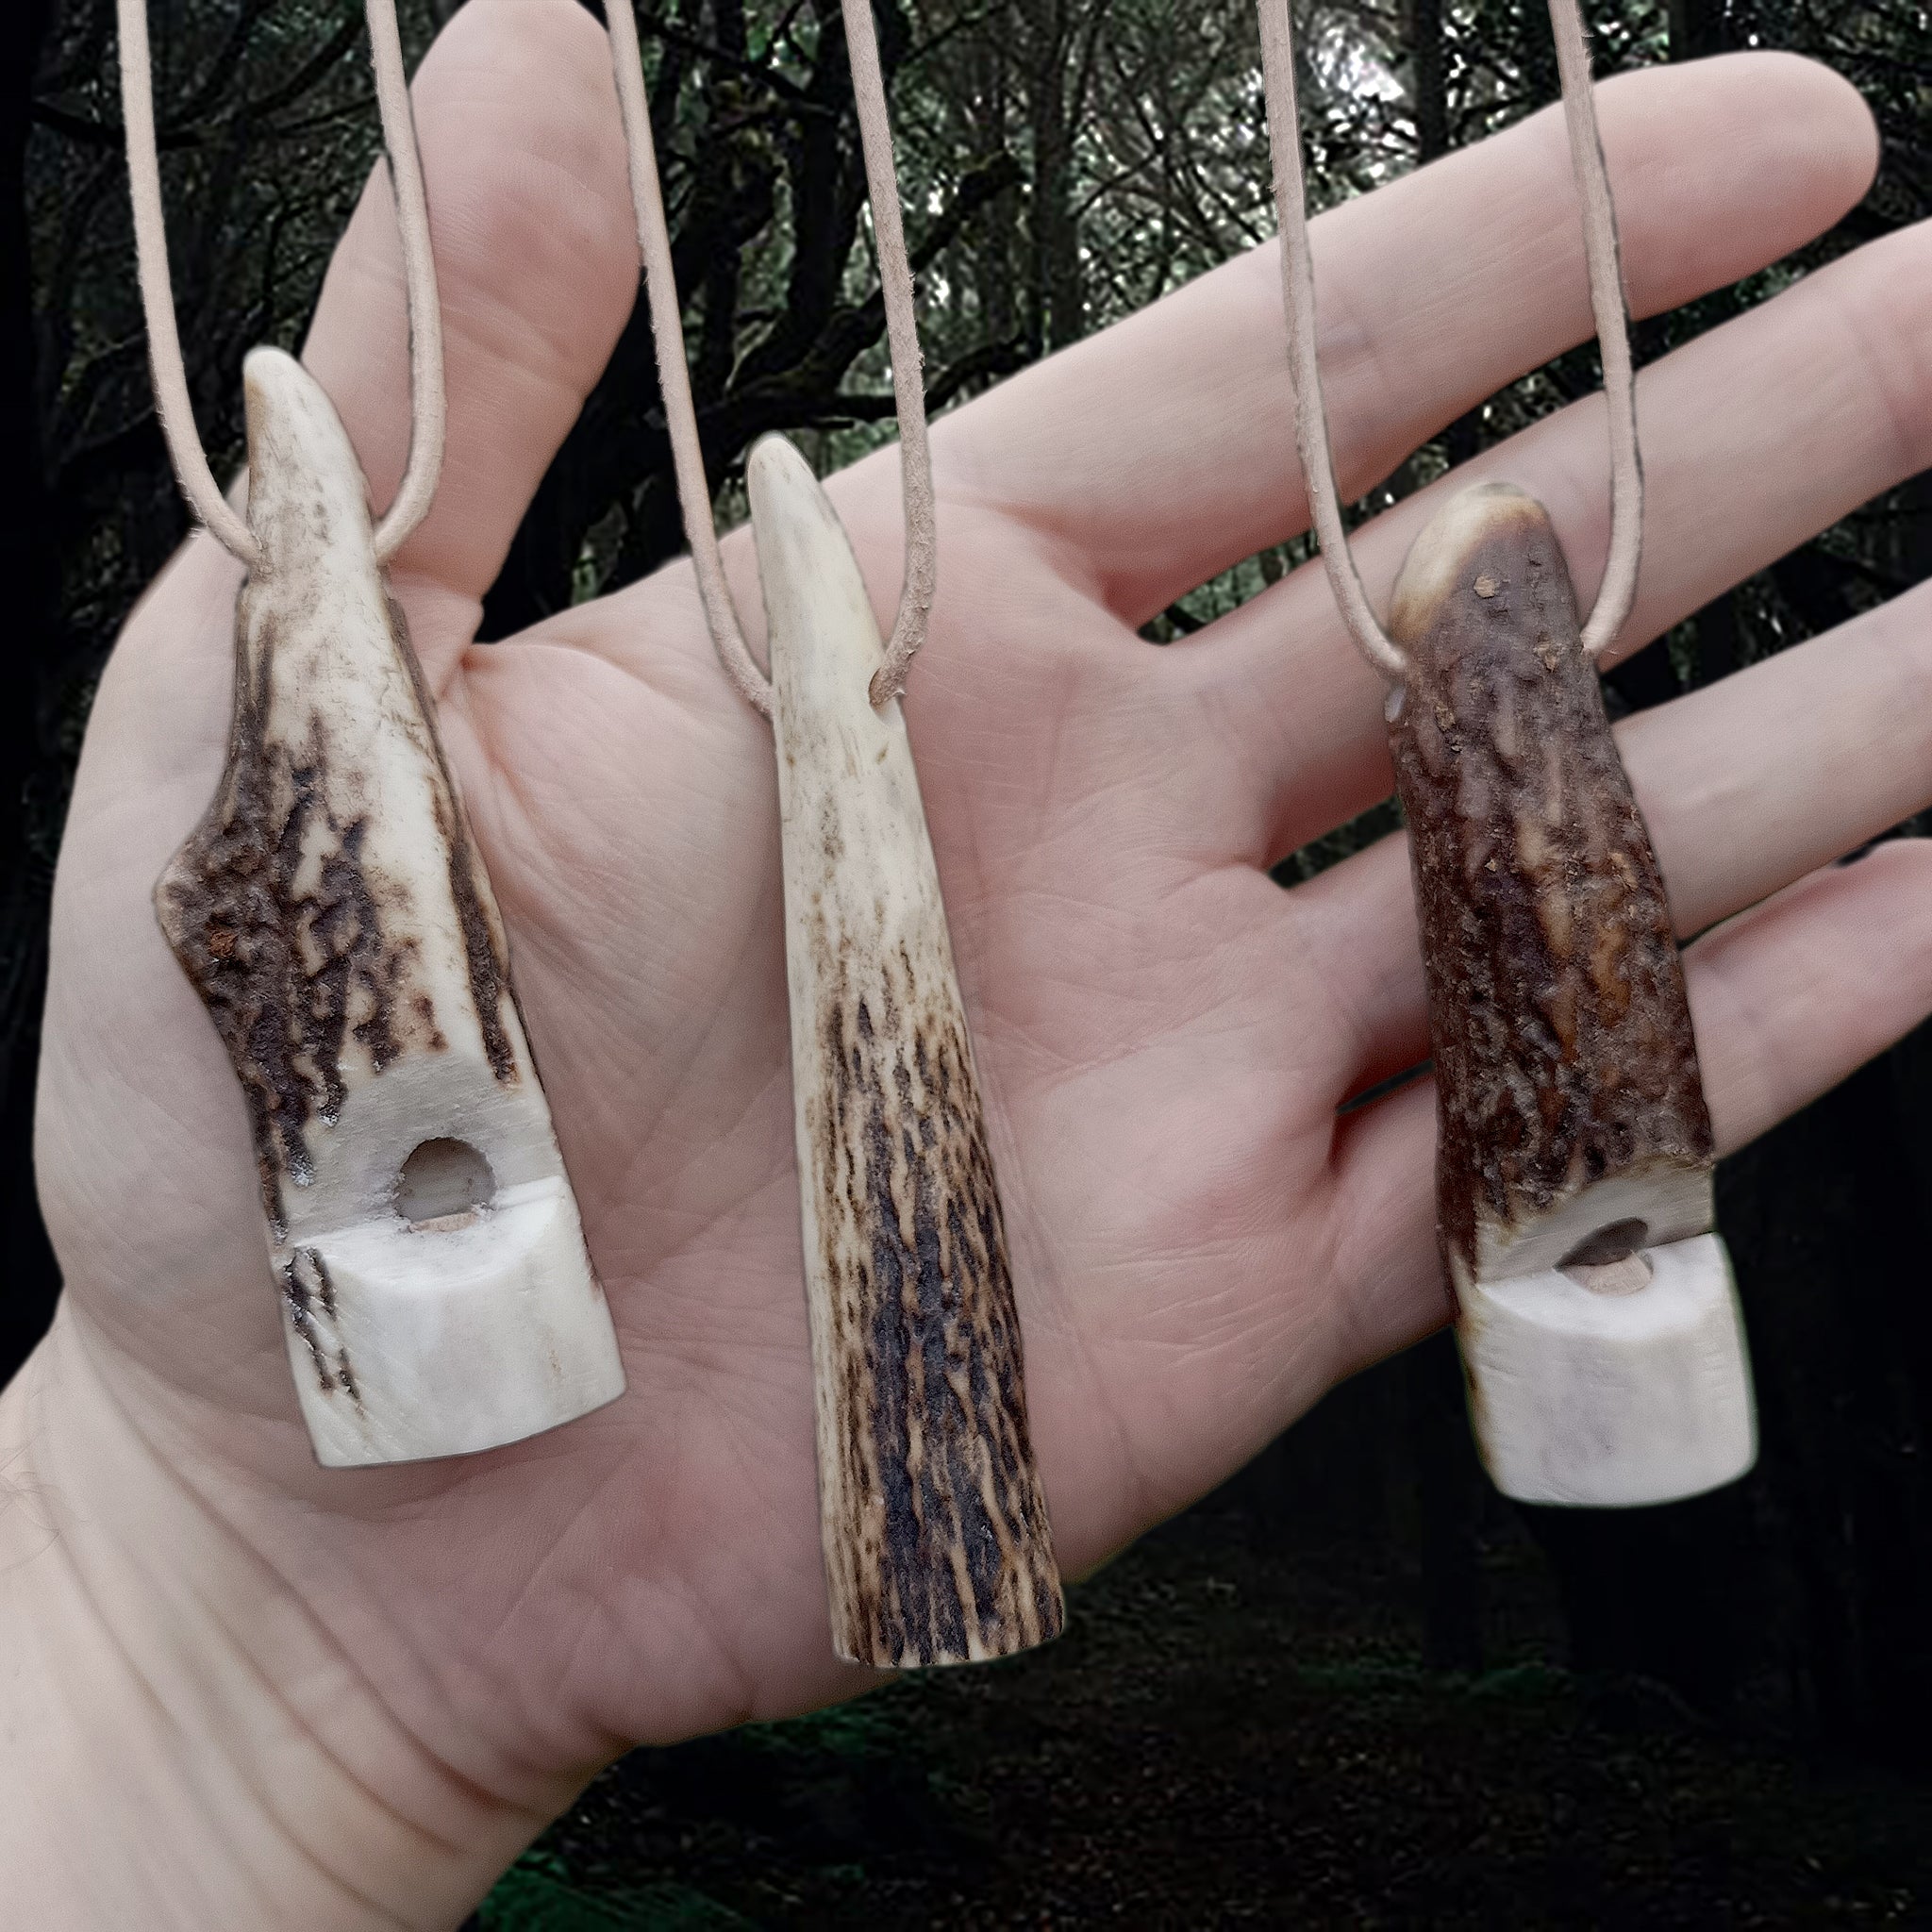 Handmade Scottish Red Deer Antler Whistle on Leather Thongs on Hand - Front and Back Views